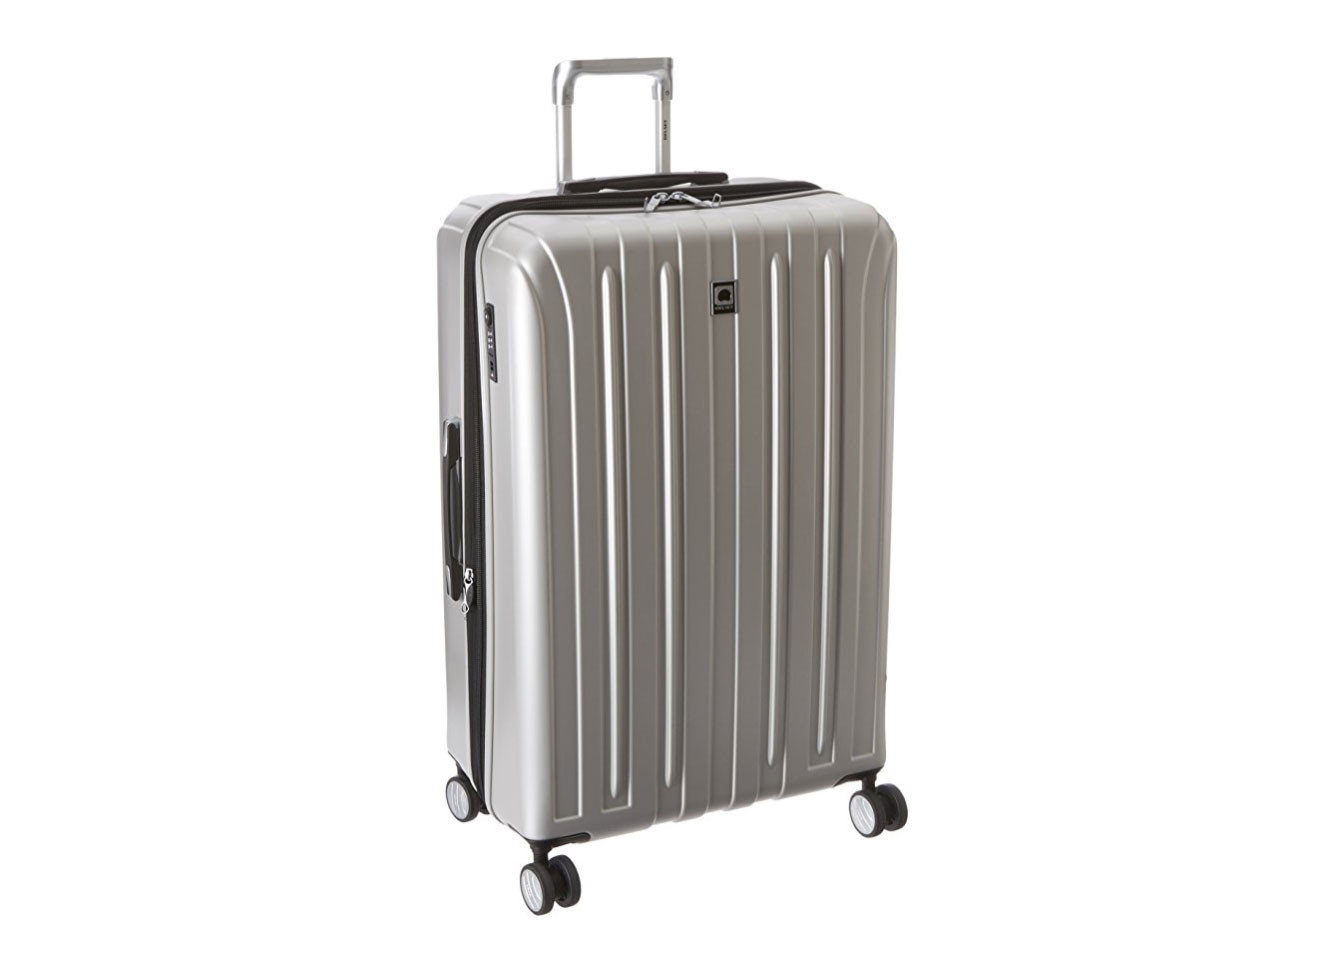 Hard top luggage by Delsey